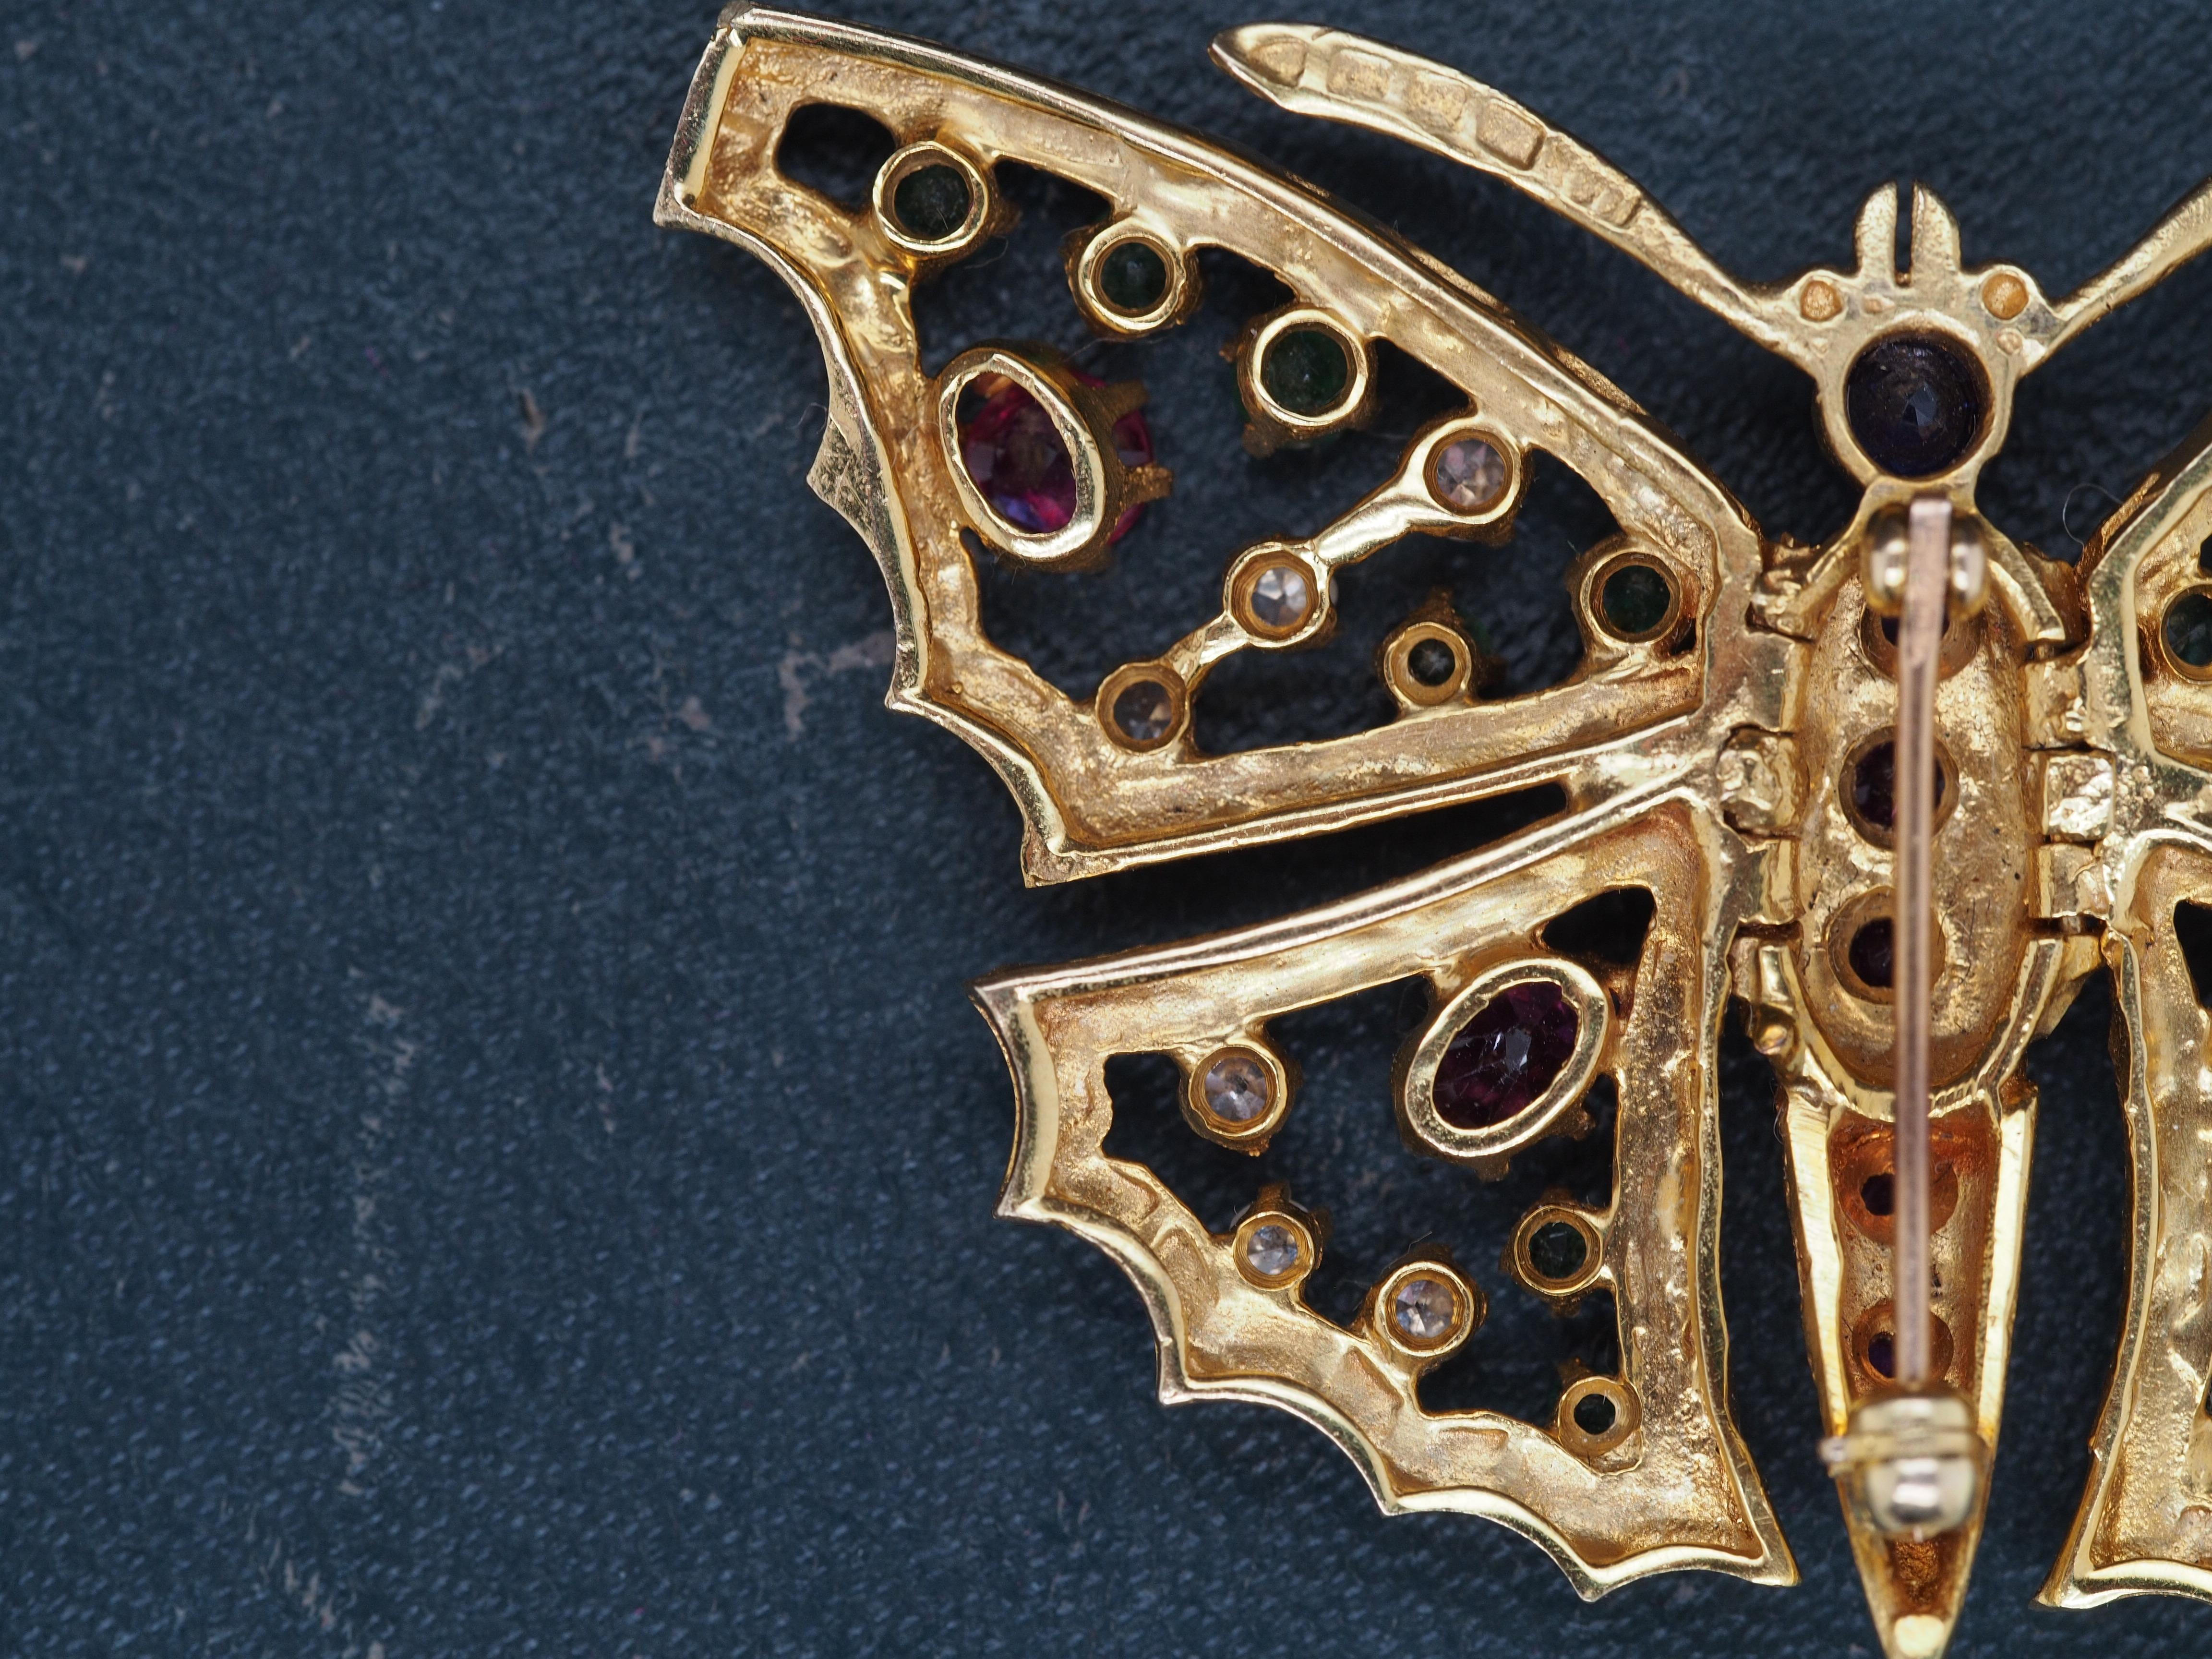 14K Yellow Gold Butterfly Brooch with Hinged Wings and Diamonds, Rubies, Emerald For Sale 1